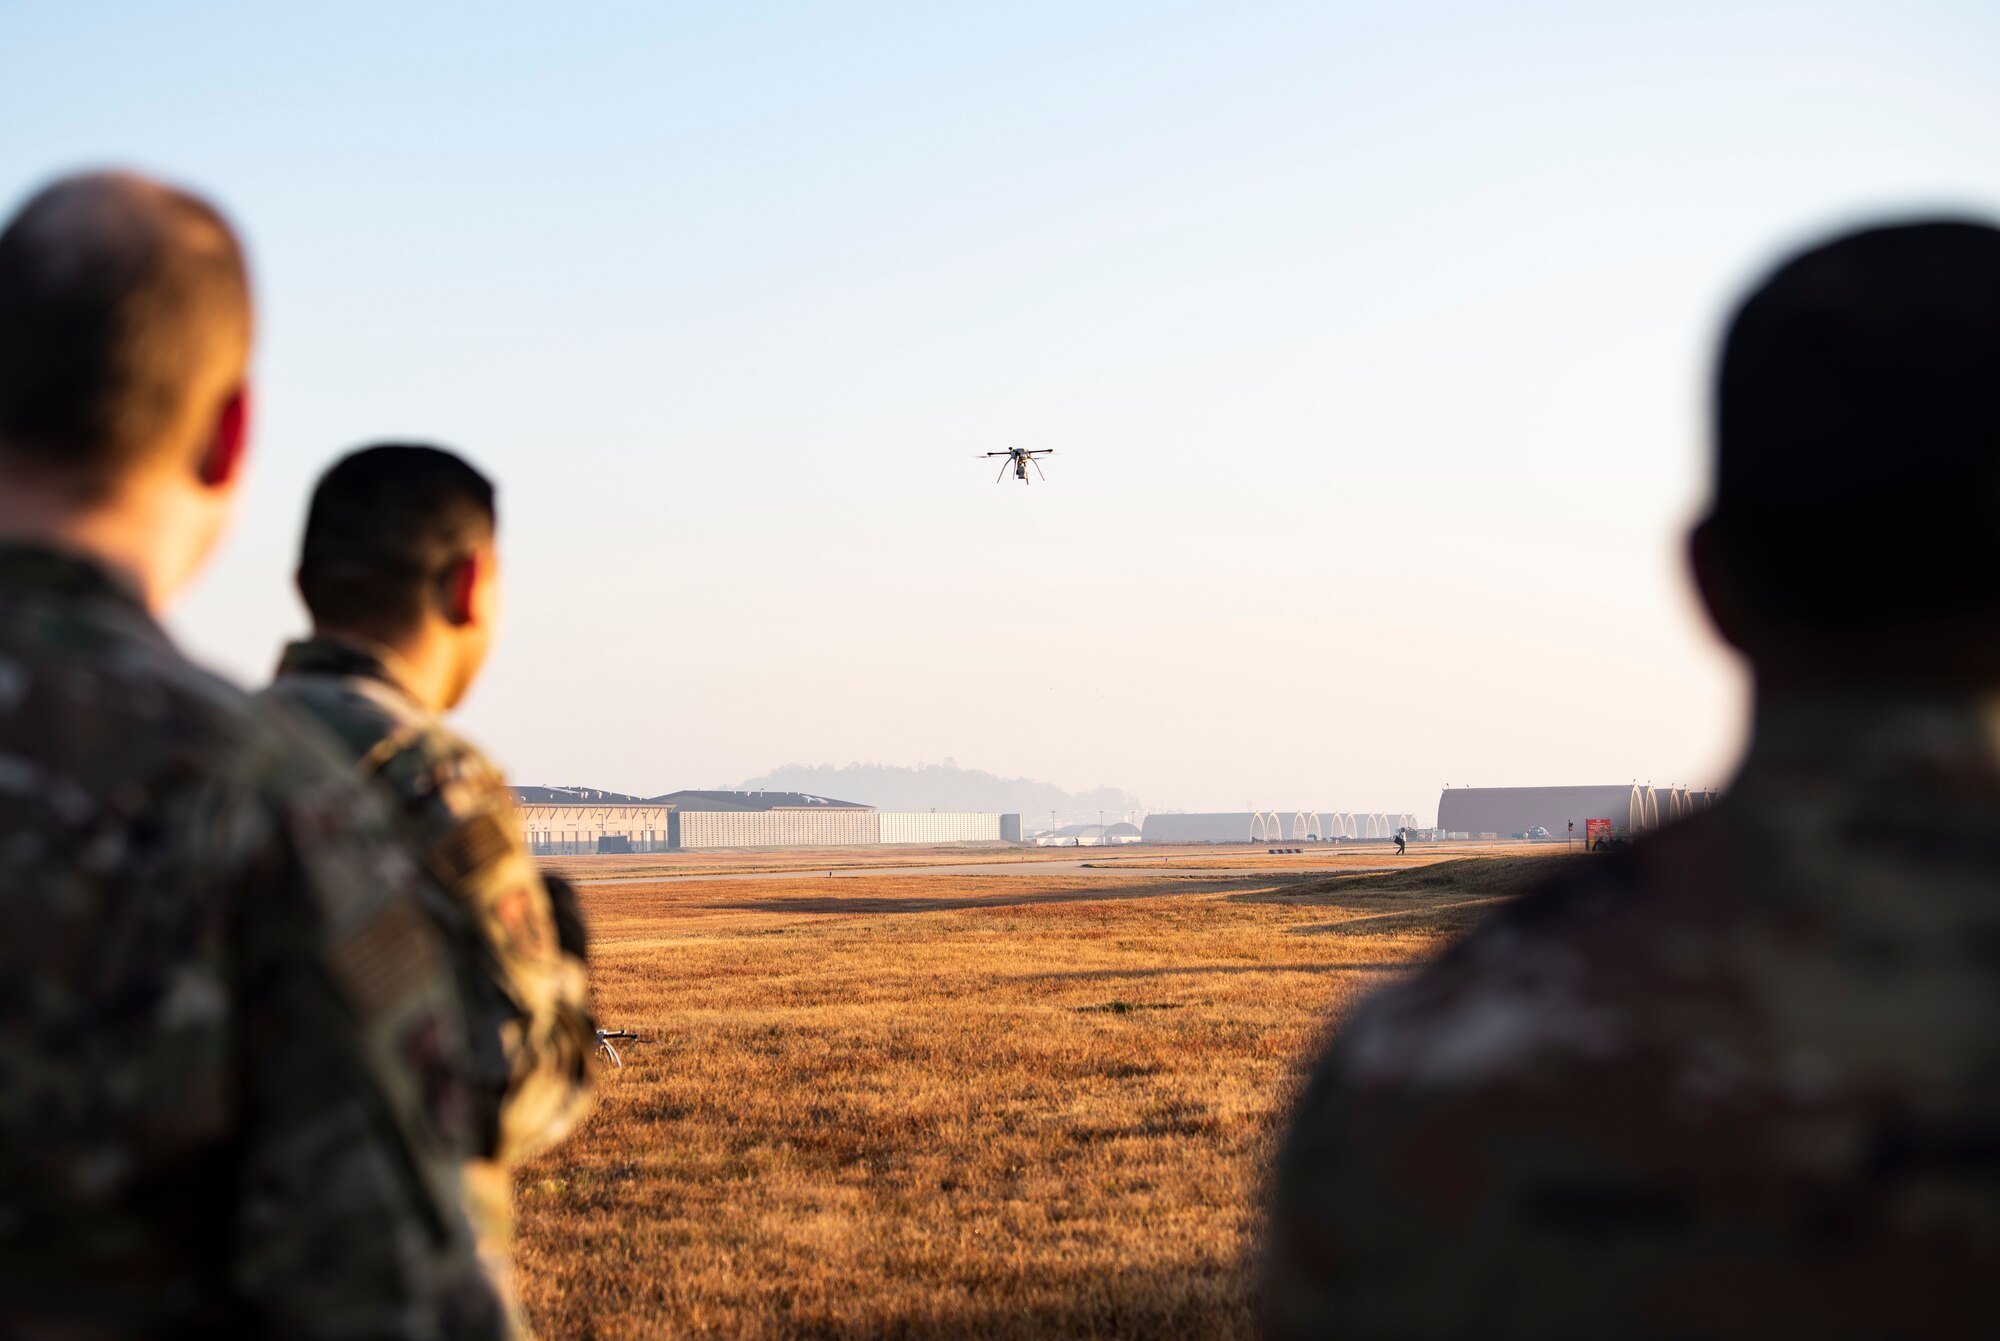 U.S. Air Force Airmen from the 8th Civil Engineer Squadron, observe a quadcopter taking off at Kunsan Air Base, Republic of Korea, Nov. 2, 2018. The 8th CES trains using small, unmanned aerial systems to survey the airfield at a quicker pace and larger scale, honing a capability that can be used in the aftermath of natural disasters to survey damage. (U.S. Air Force photo by Senior Airman Stefan Alvarez)